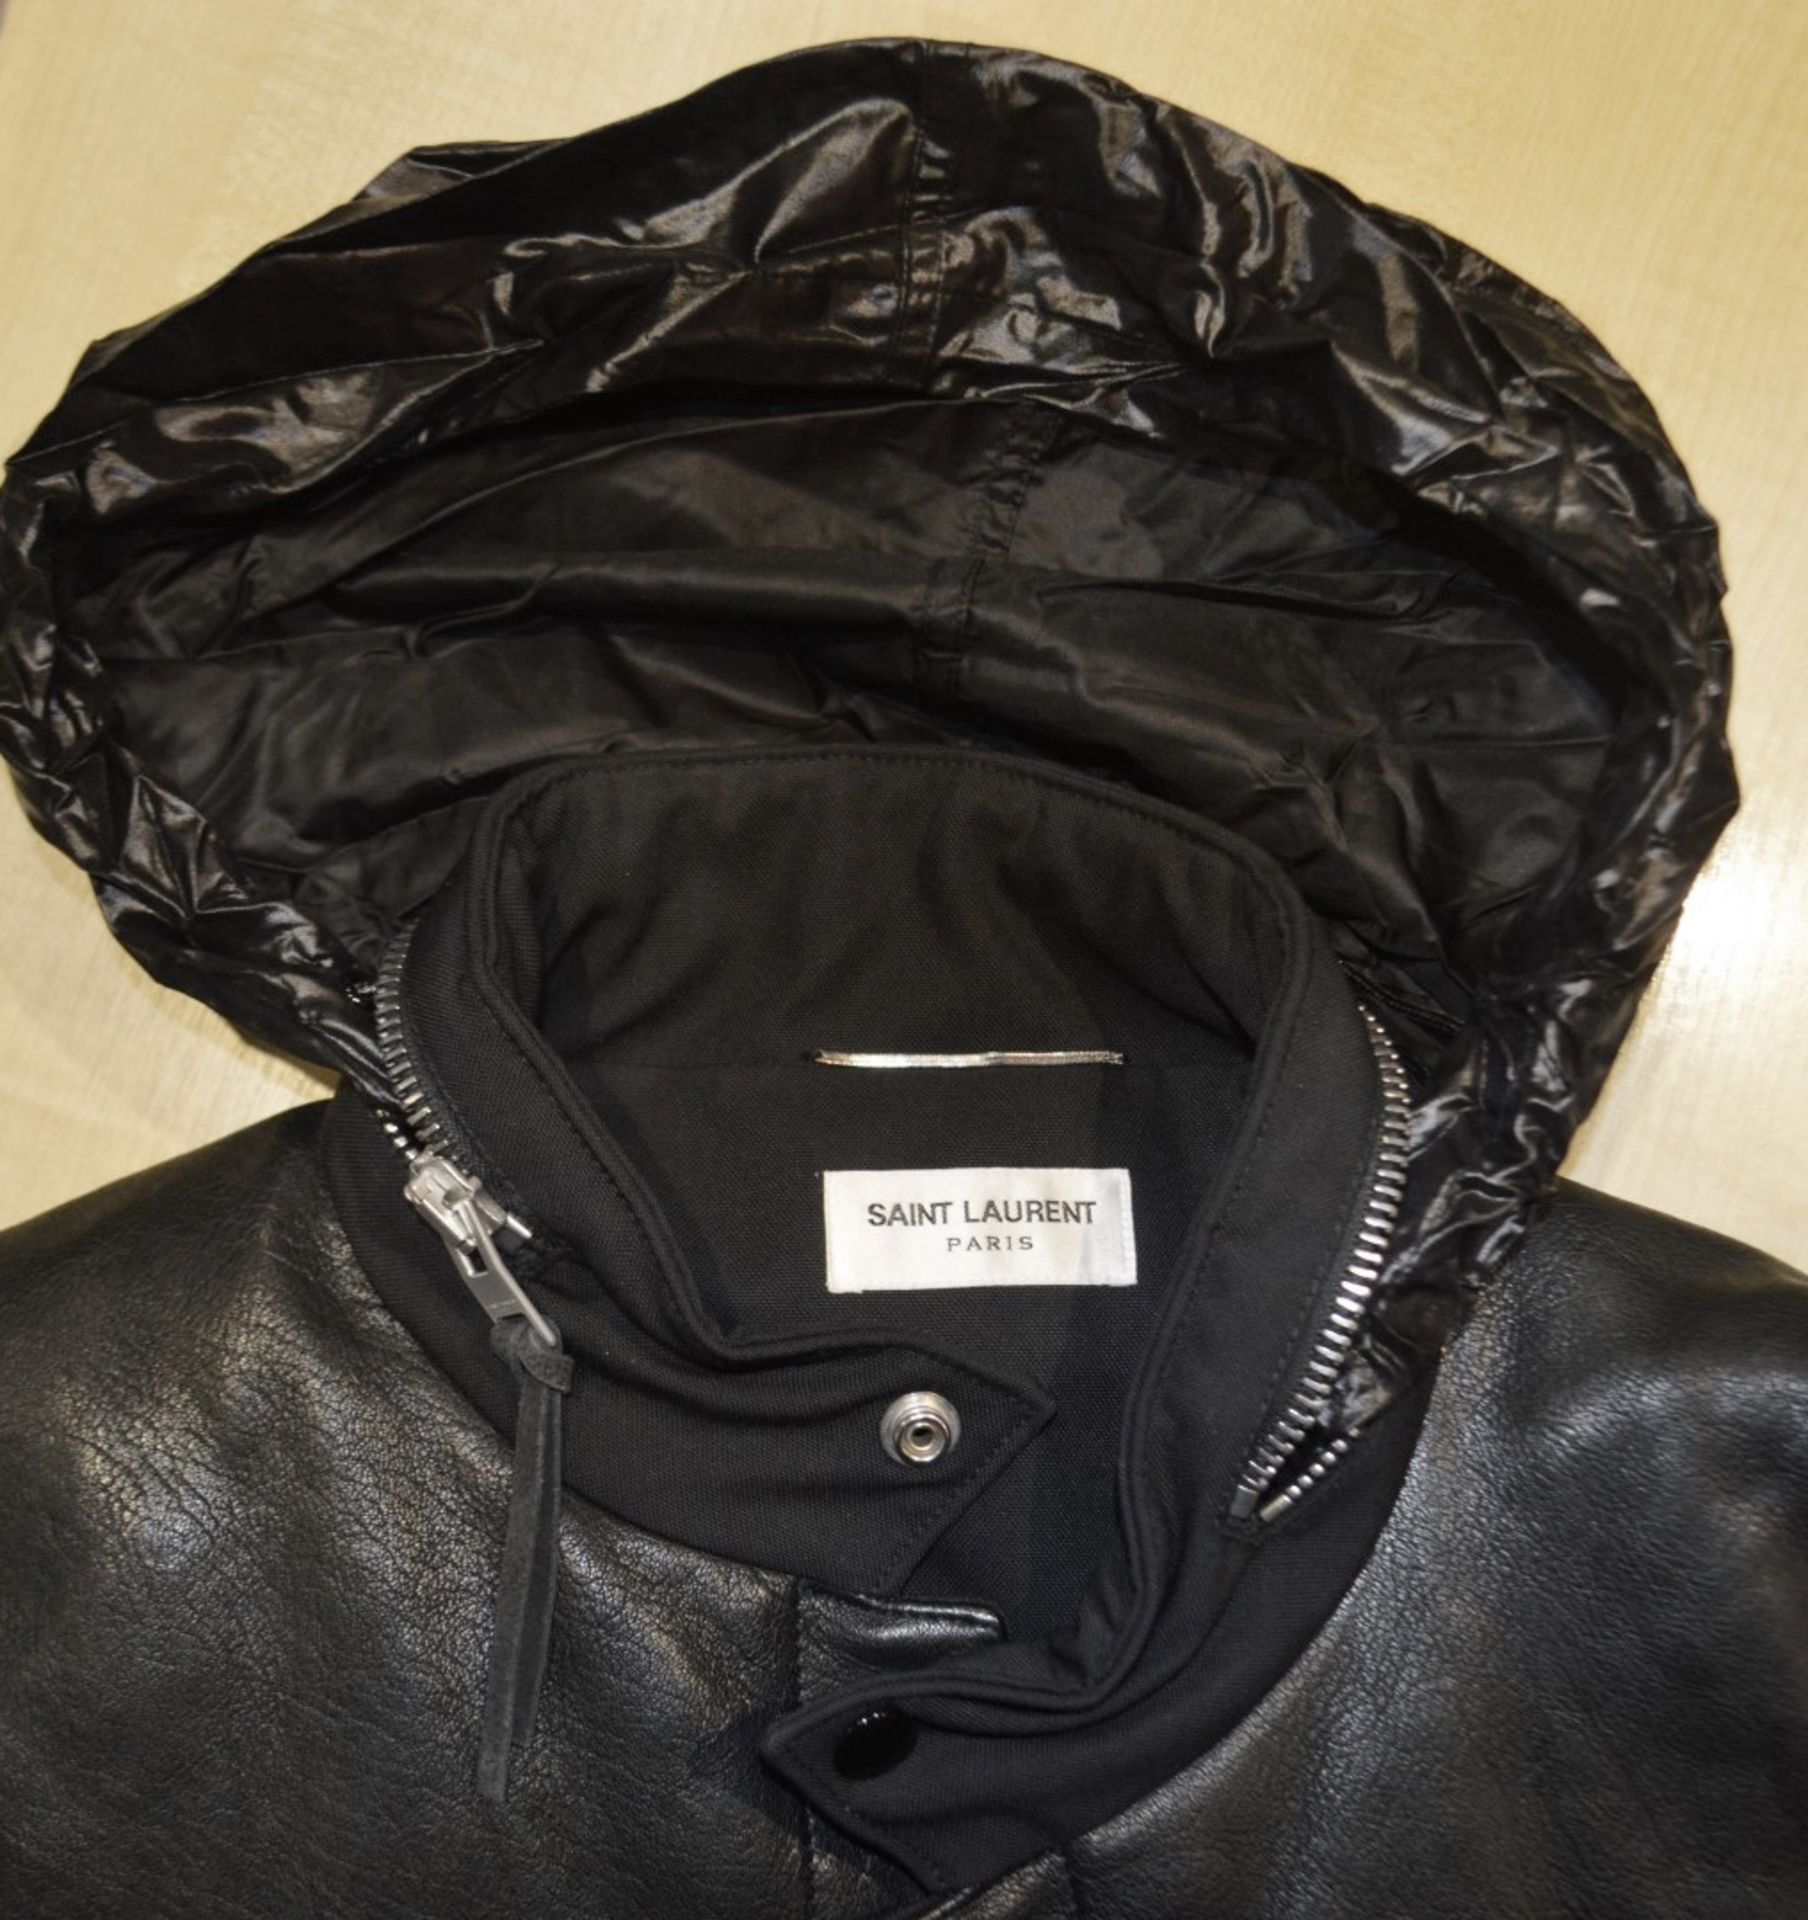 1 x Men's Genuine Yves Saint Laurant Gillet / Body Warmer In Black With Leather Panelling - Image 2 of 8